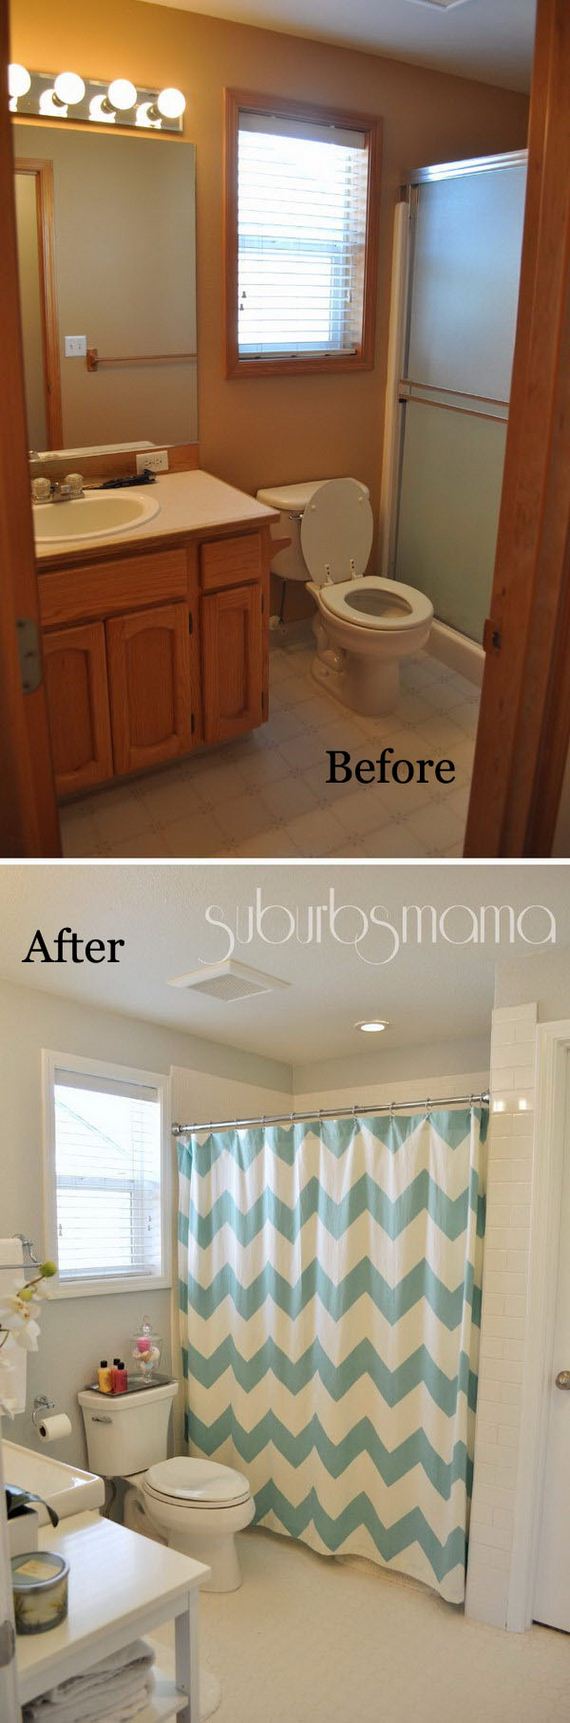 21-awesome-bathroom-makeovers